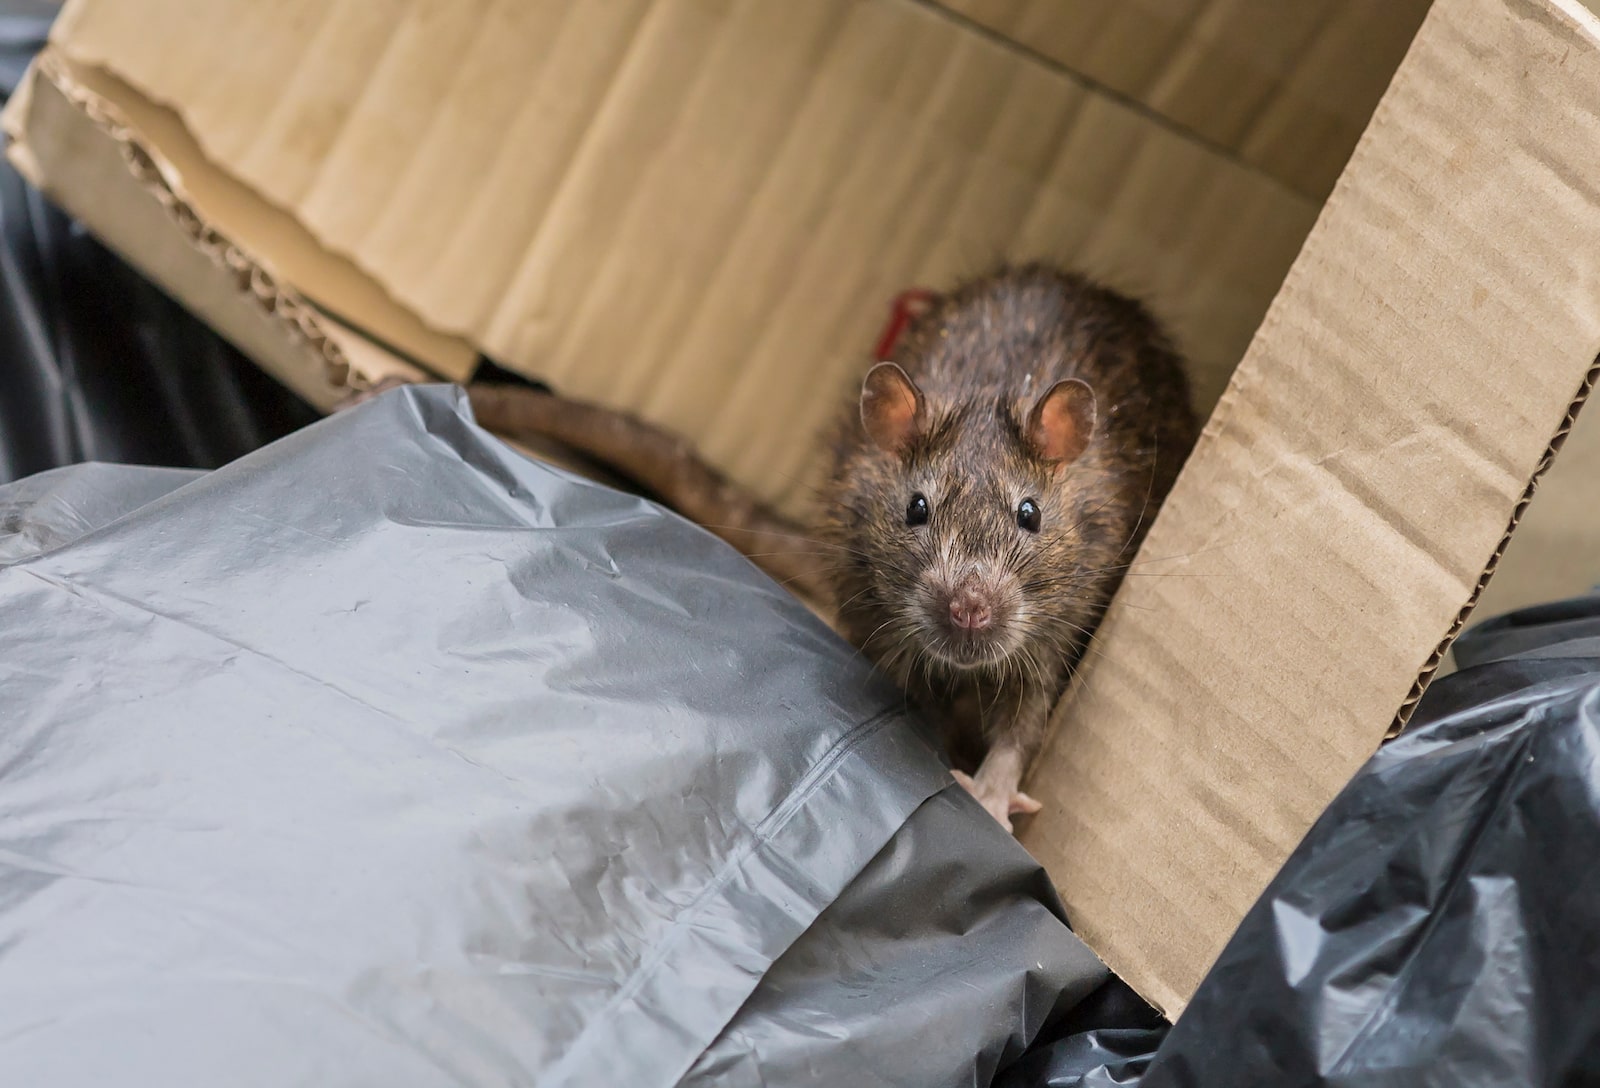 a large brown rat sits in a discarded cardboard box atop trash bags